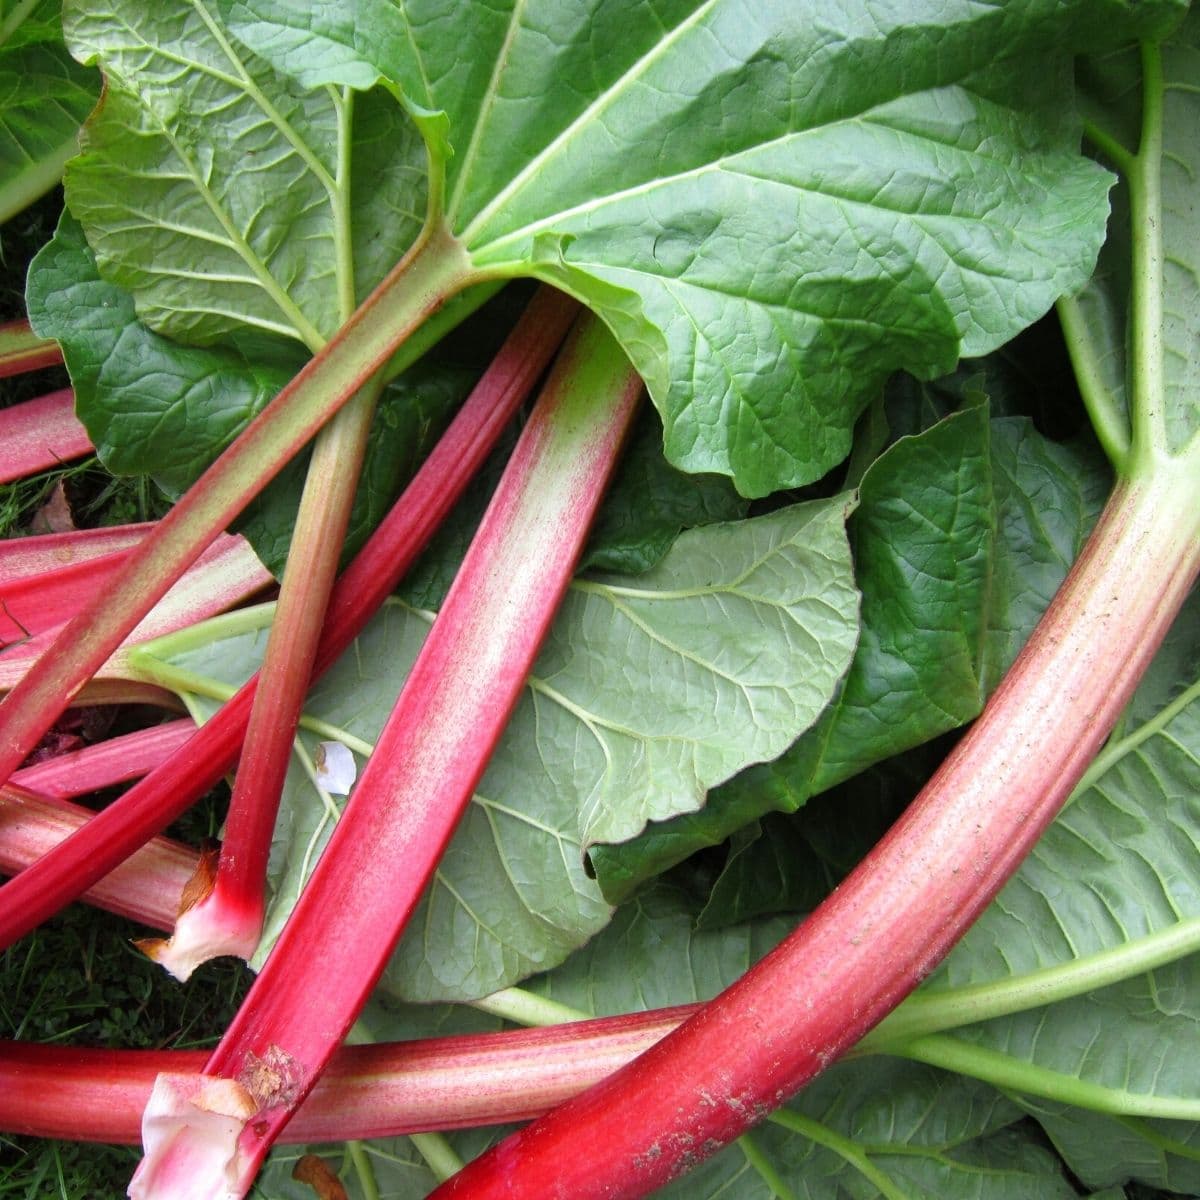 Rhubarb stalks with leaves still attached freshly picked - copyright to Canva.com